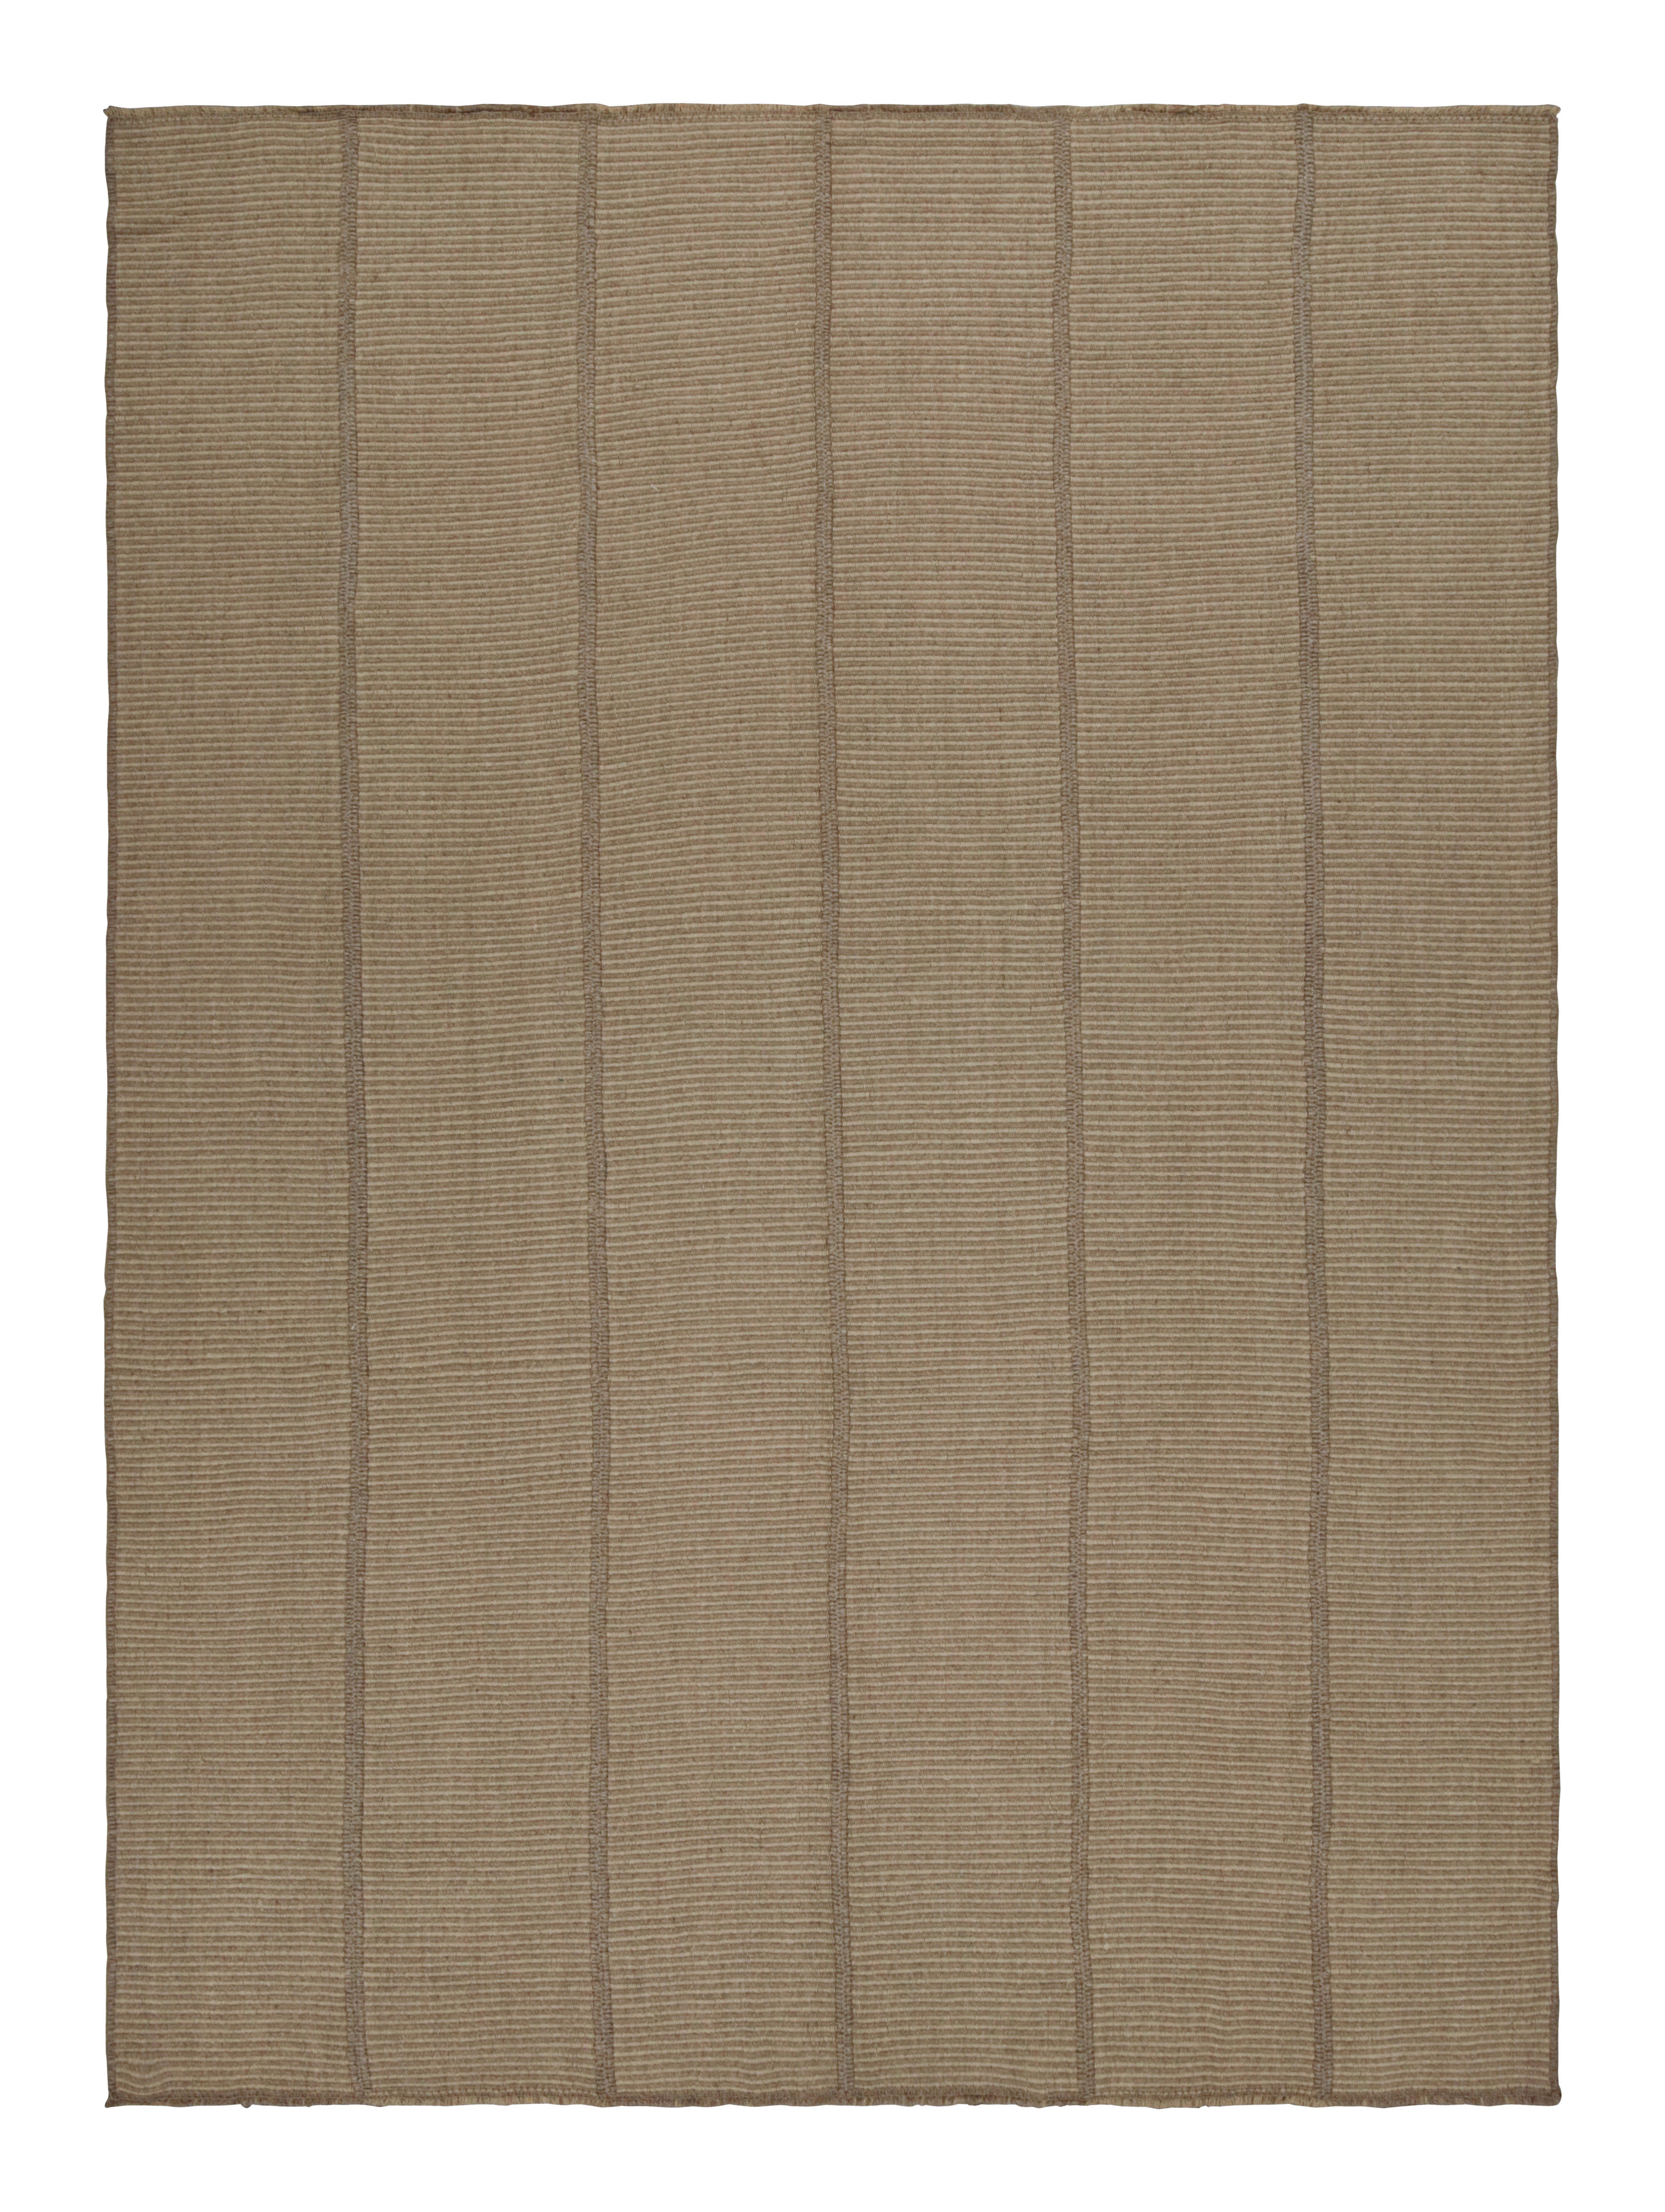 Rug & Kilim’s Contemporary Kilim in Brown Accents, with Textural Stripes For Sale